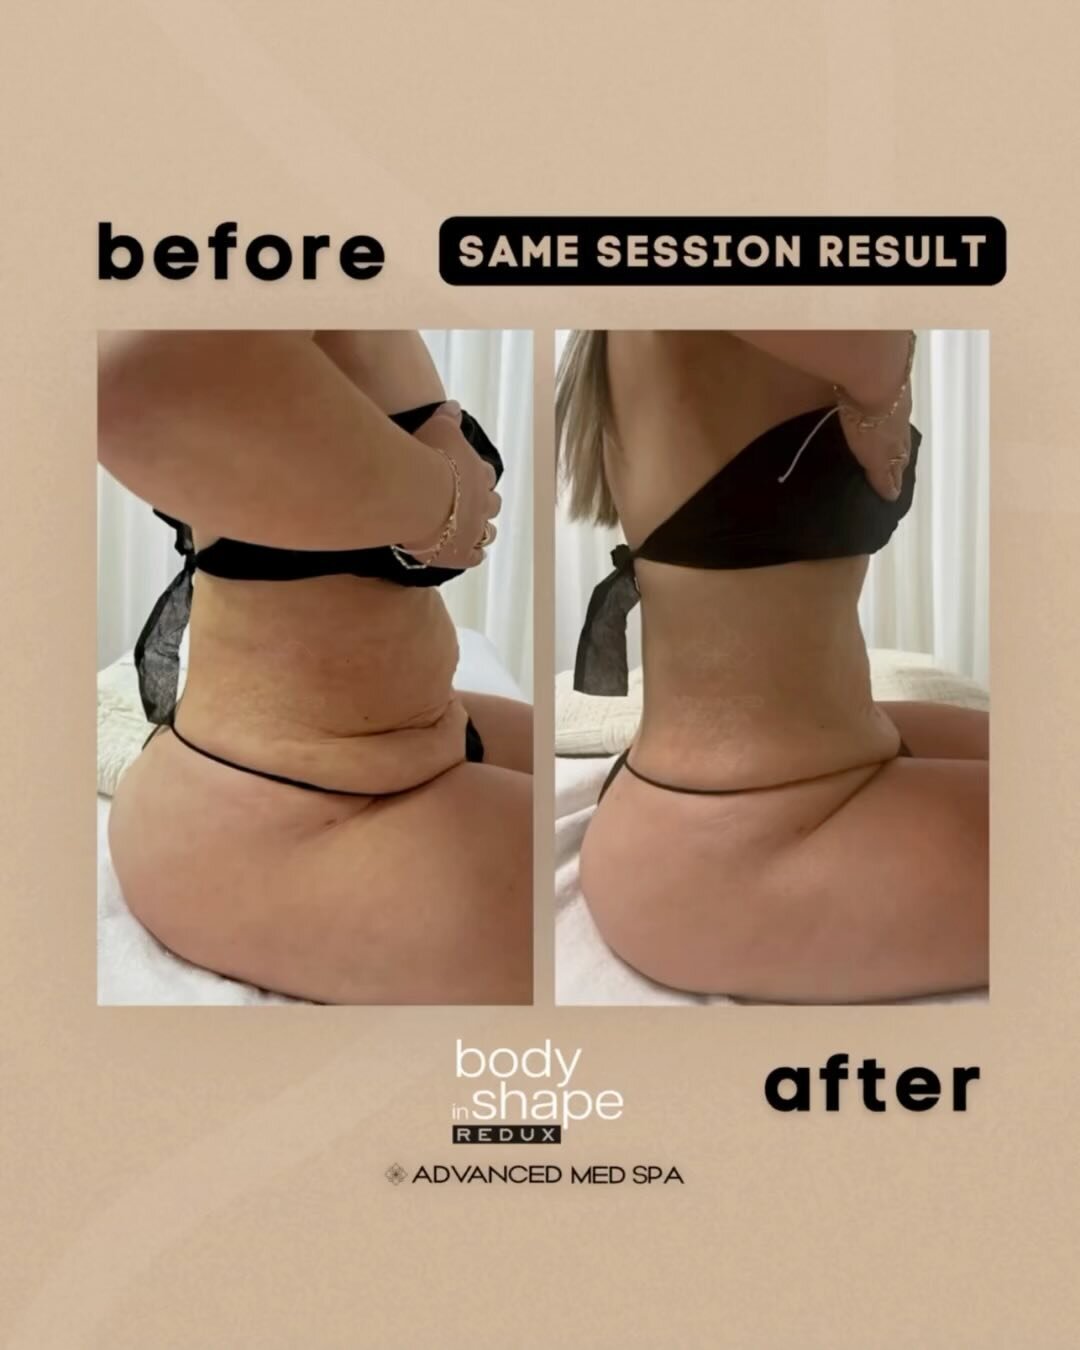 BODY IN SHAPE TRANSFORMATION 🤩⁠
Take a look at the difference in this beautiful patient after only ONE session of Body in Shape &mdash; a firmer, flatter tummy, and a more defined figure! ⏳⁠
⁠
👉🏼 Body in Shape is our protocol that&rsquo;s unlike A